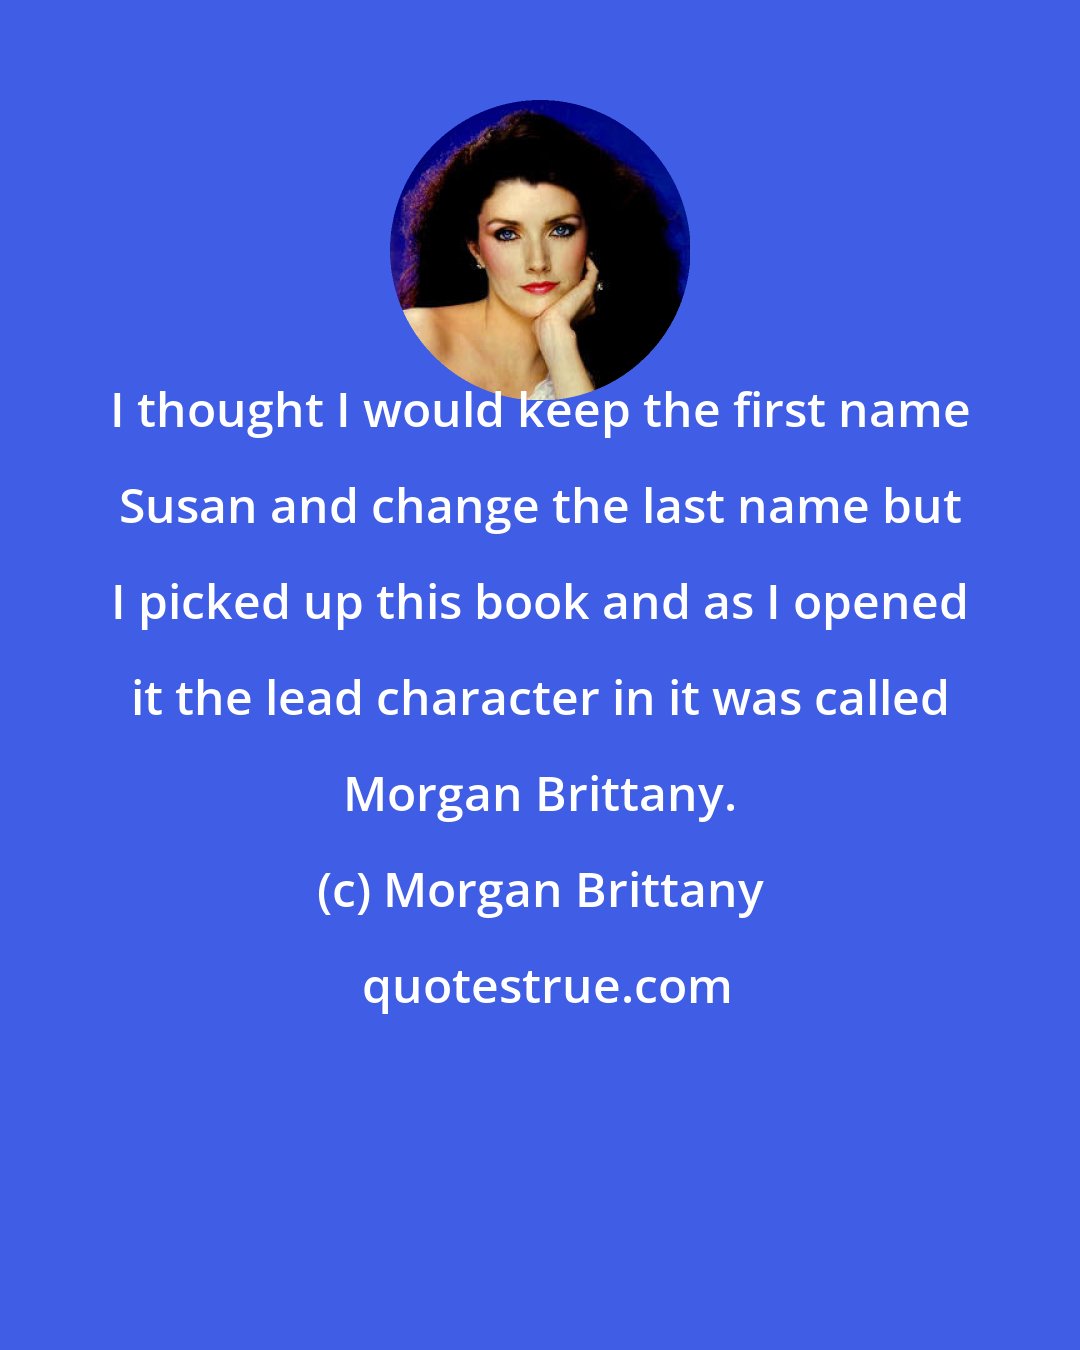 Morgan Brittany: I thought I would keep the first name Susan and change the last name but I picked up this book and as I opened it the lead character in it was called Morgan Brittany.